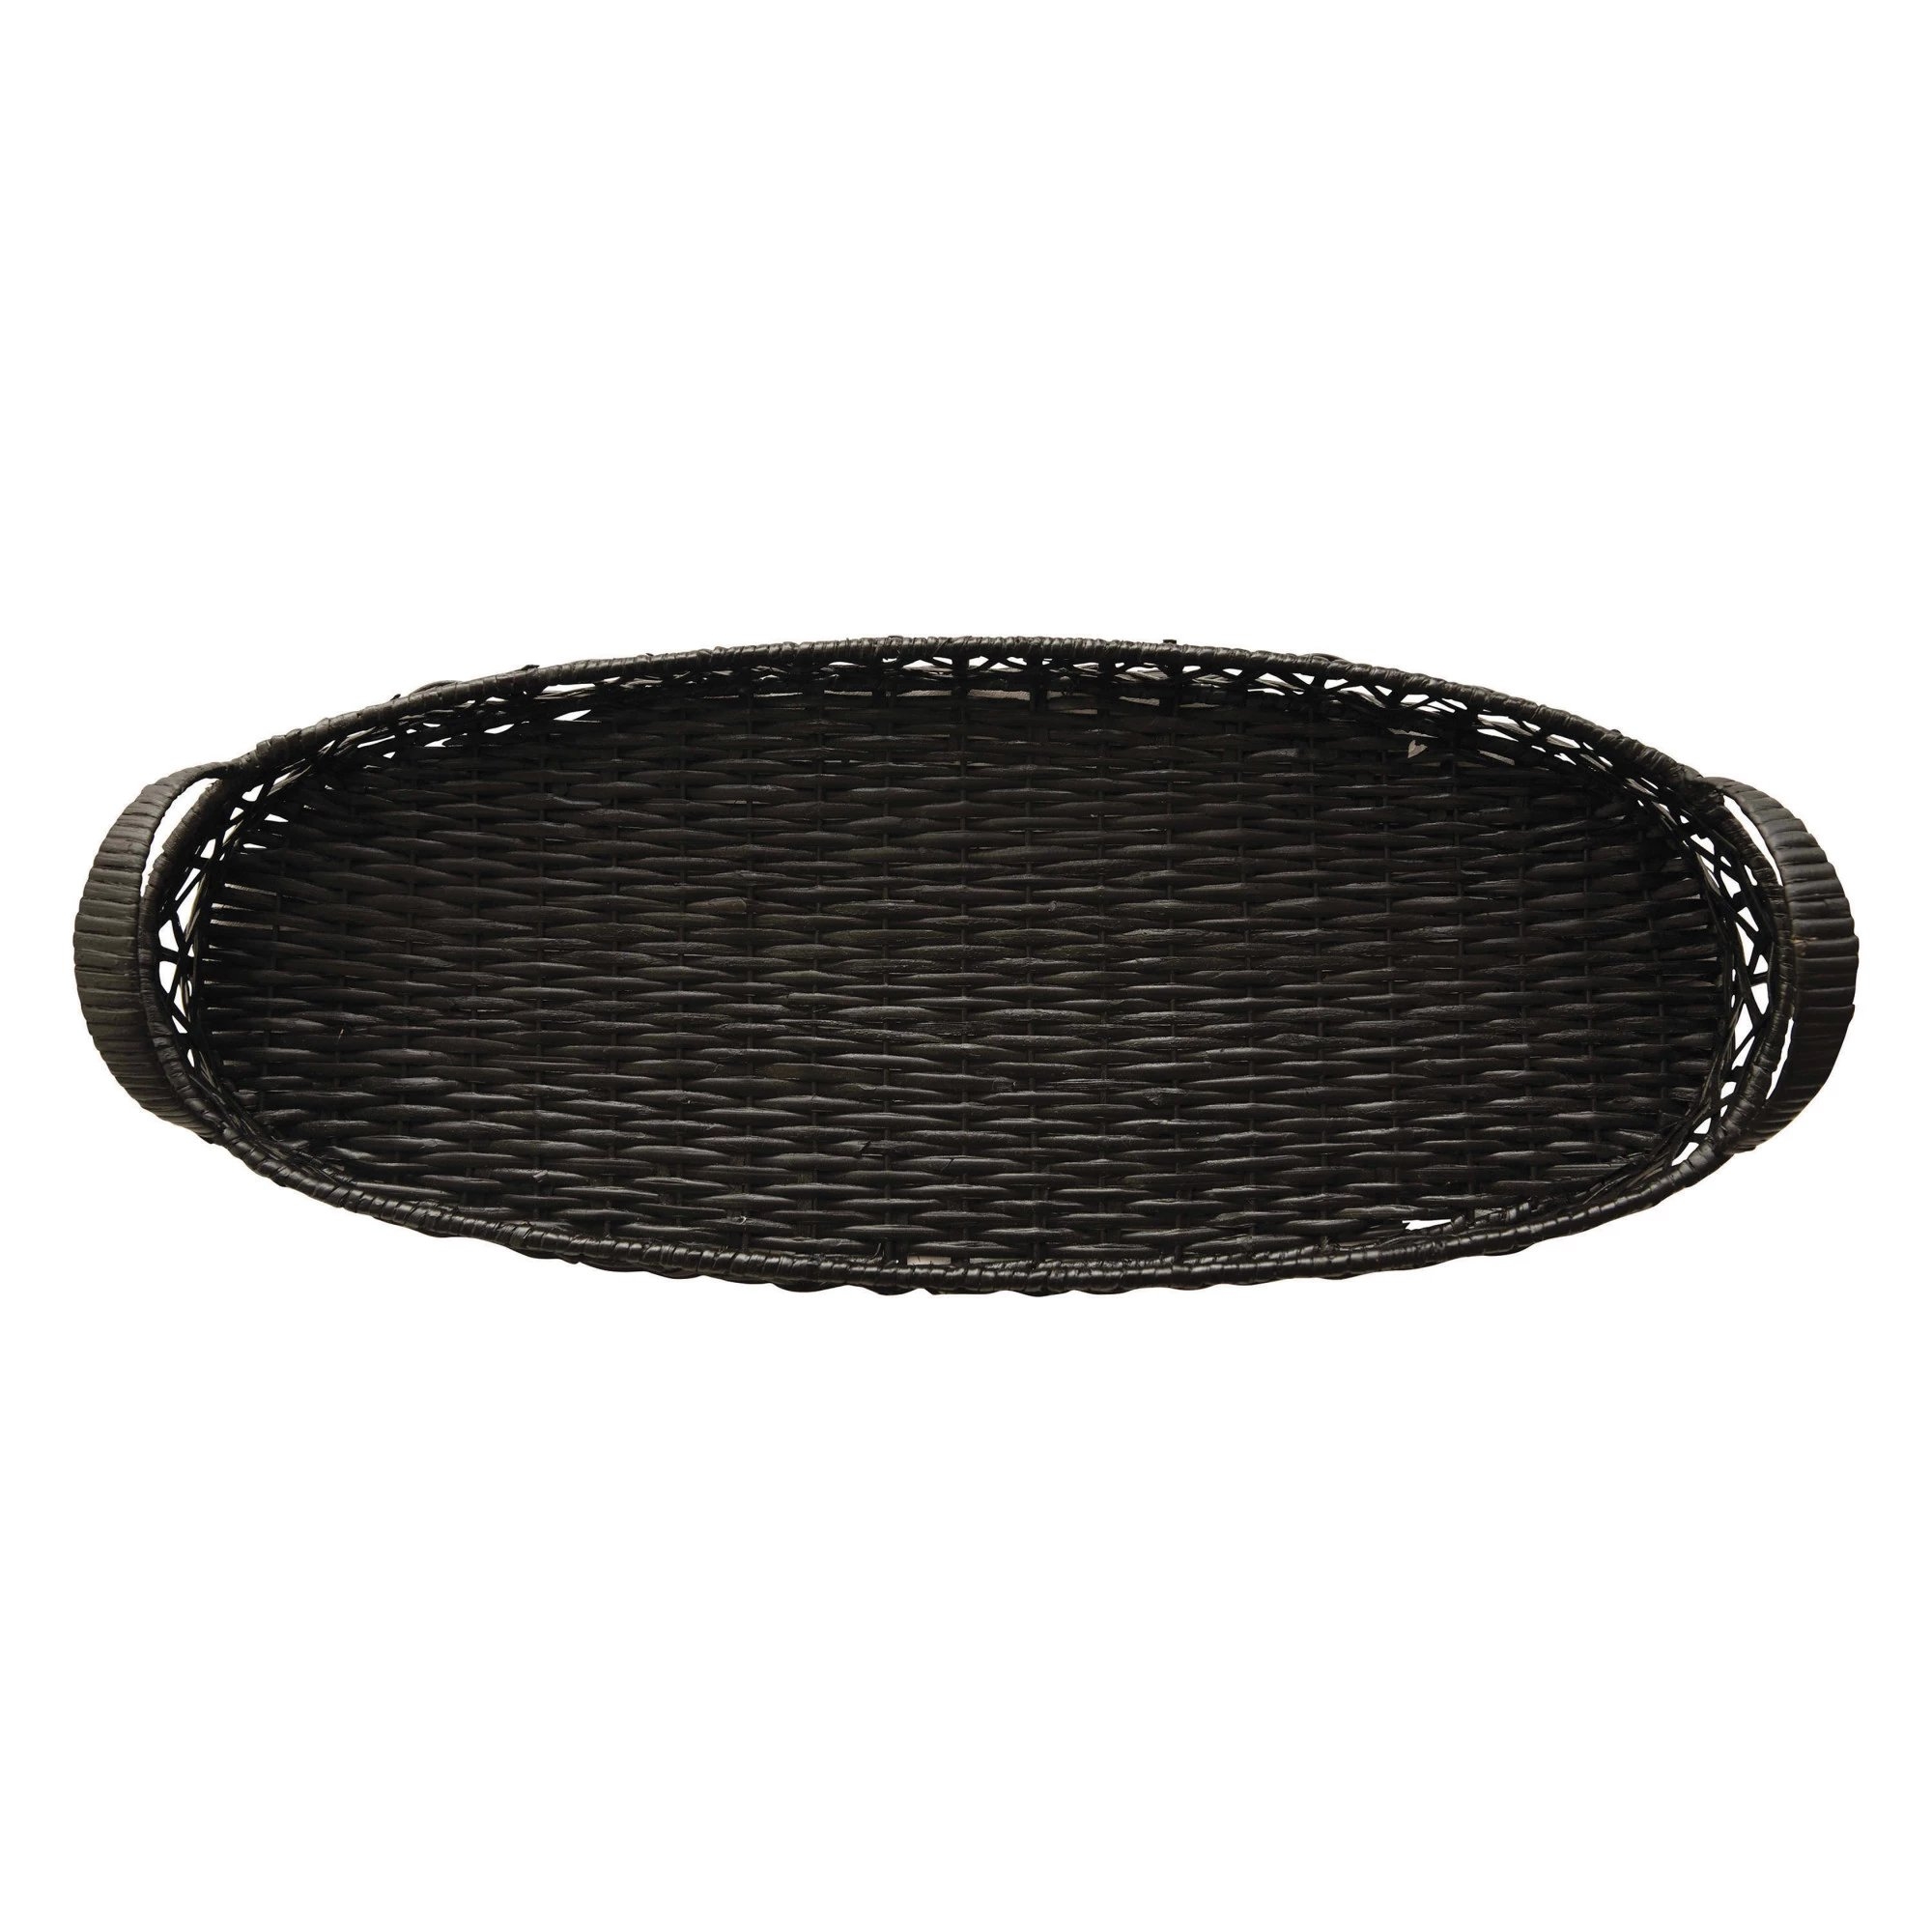 Decorative Hand-Woven Rattan Tray with Handles, Black - Image 4